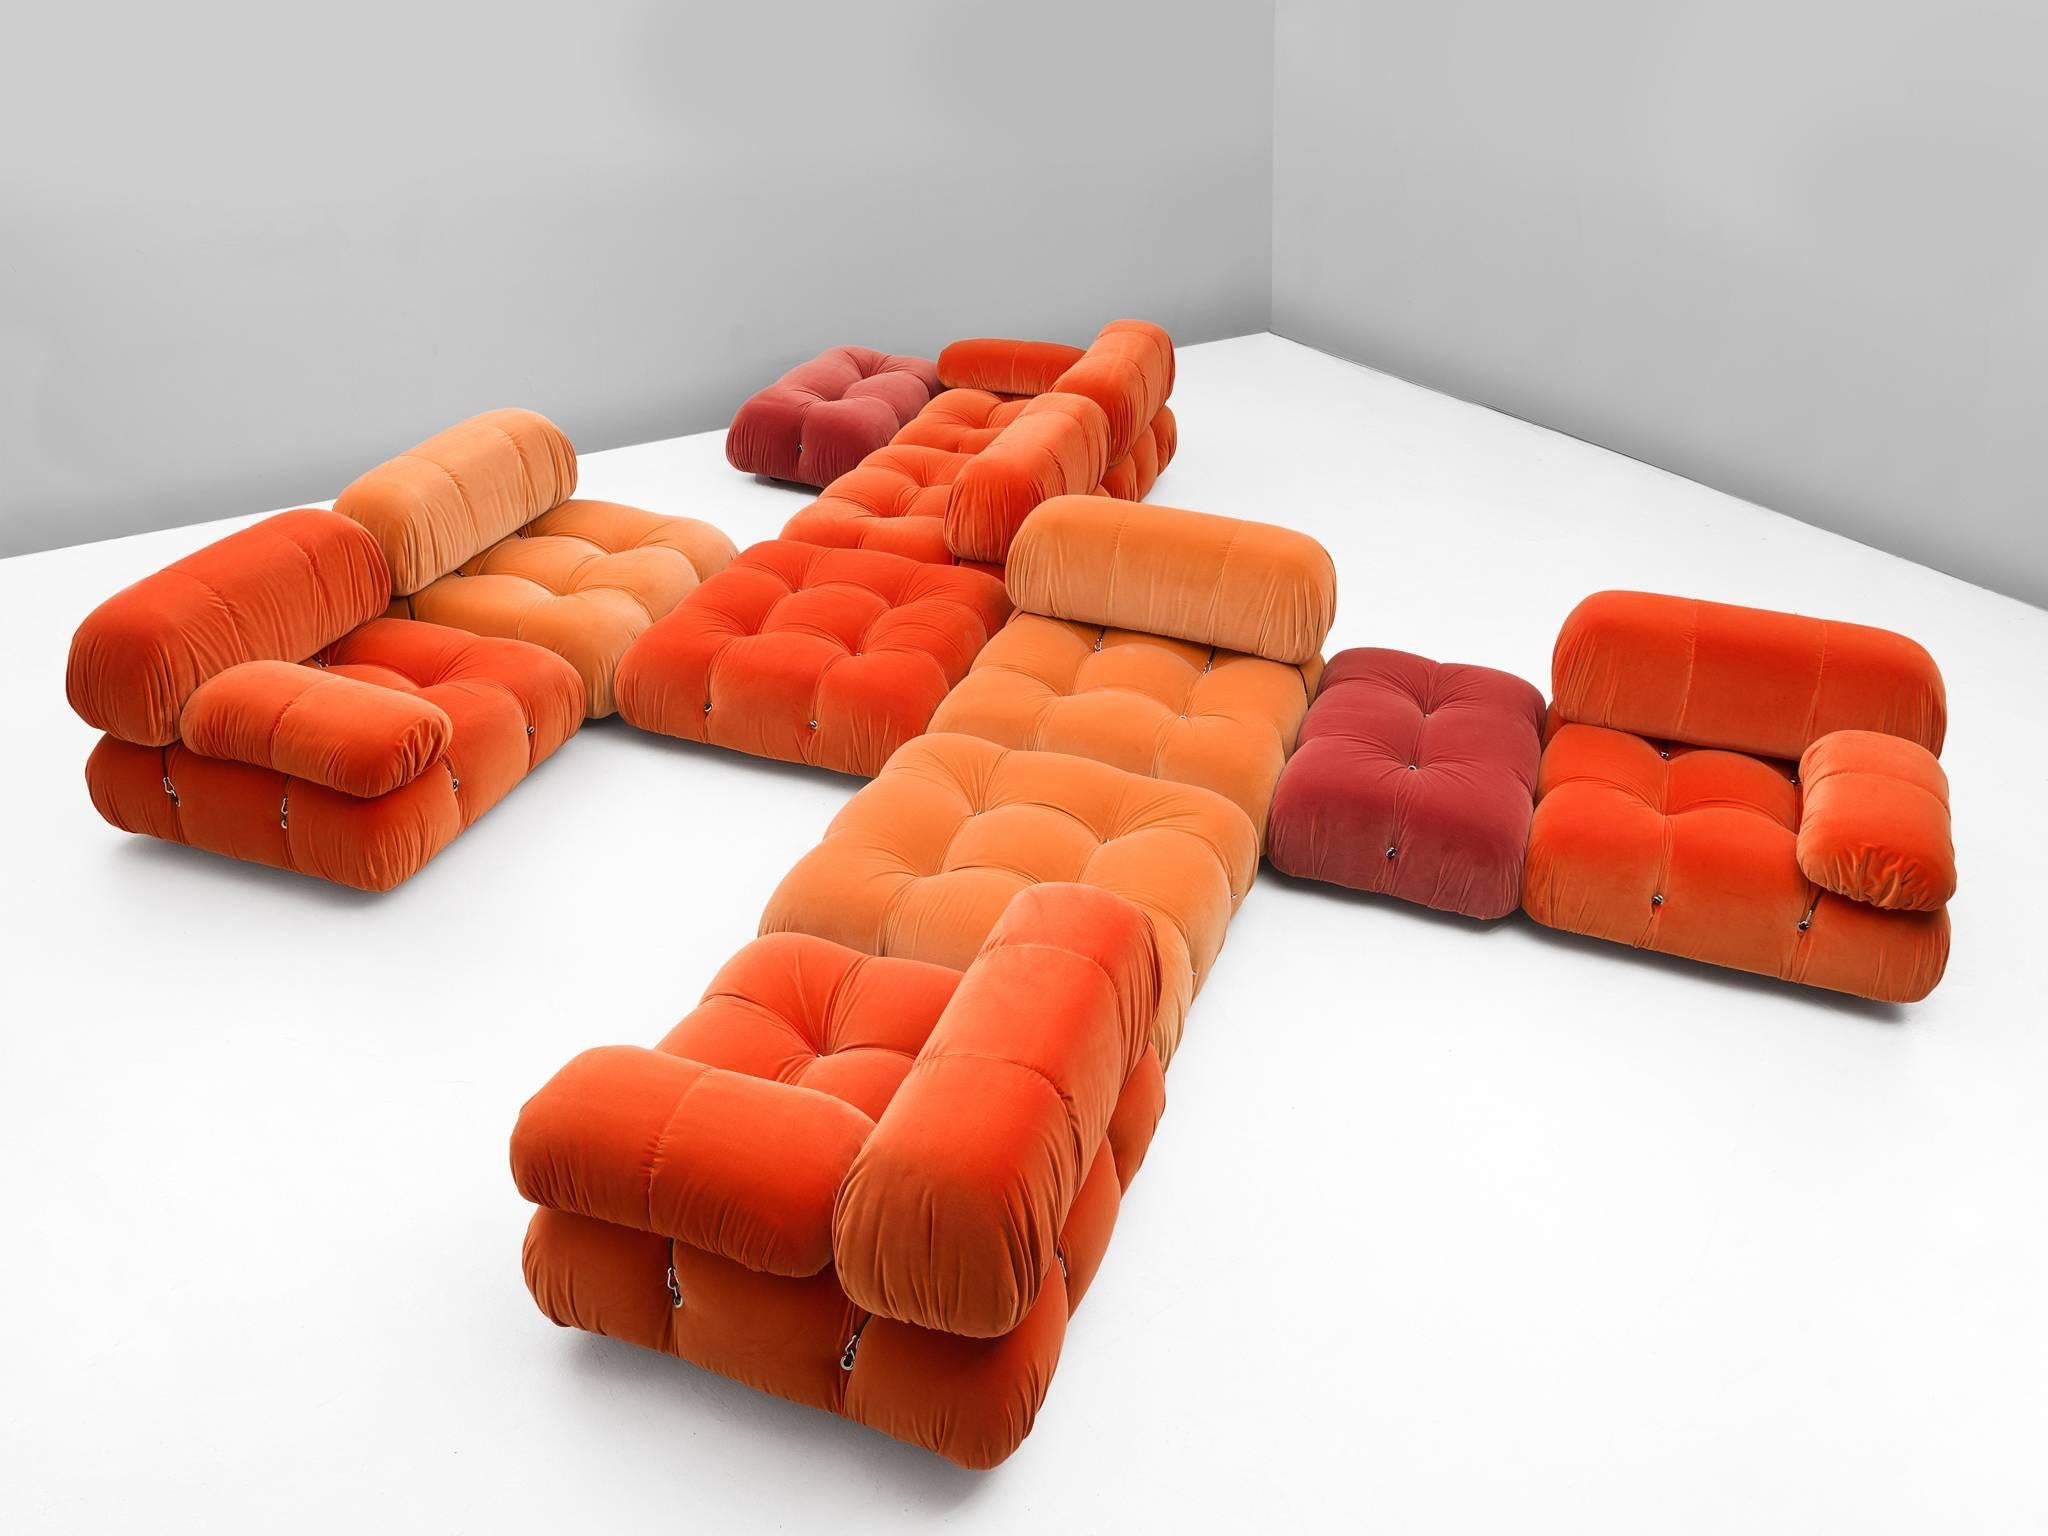 Large modular Cameleonda sofa, in orange upholstery by Mario Bellini for B&B Italia, Italy, 1972.

The sectional elements of this sofa can be used freely and apart from one another. The backs and armrests are provided with rings and carabiners,